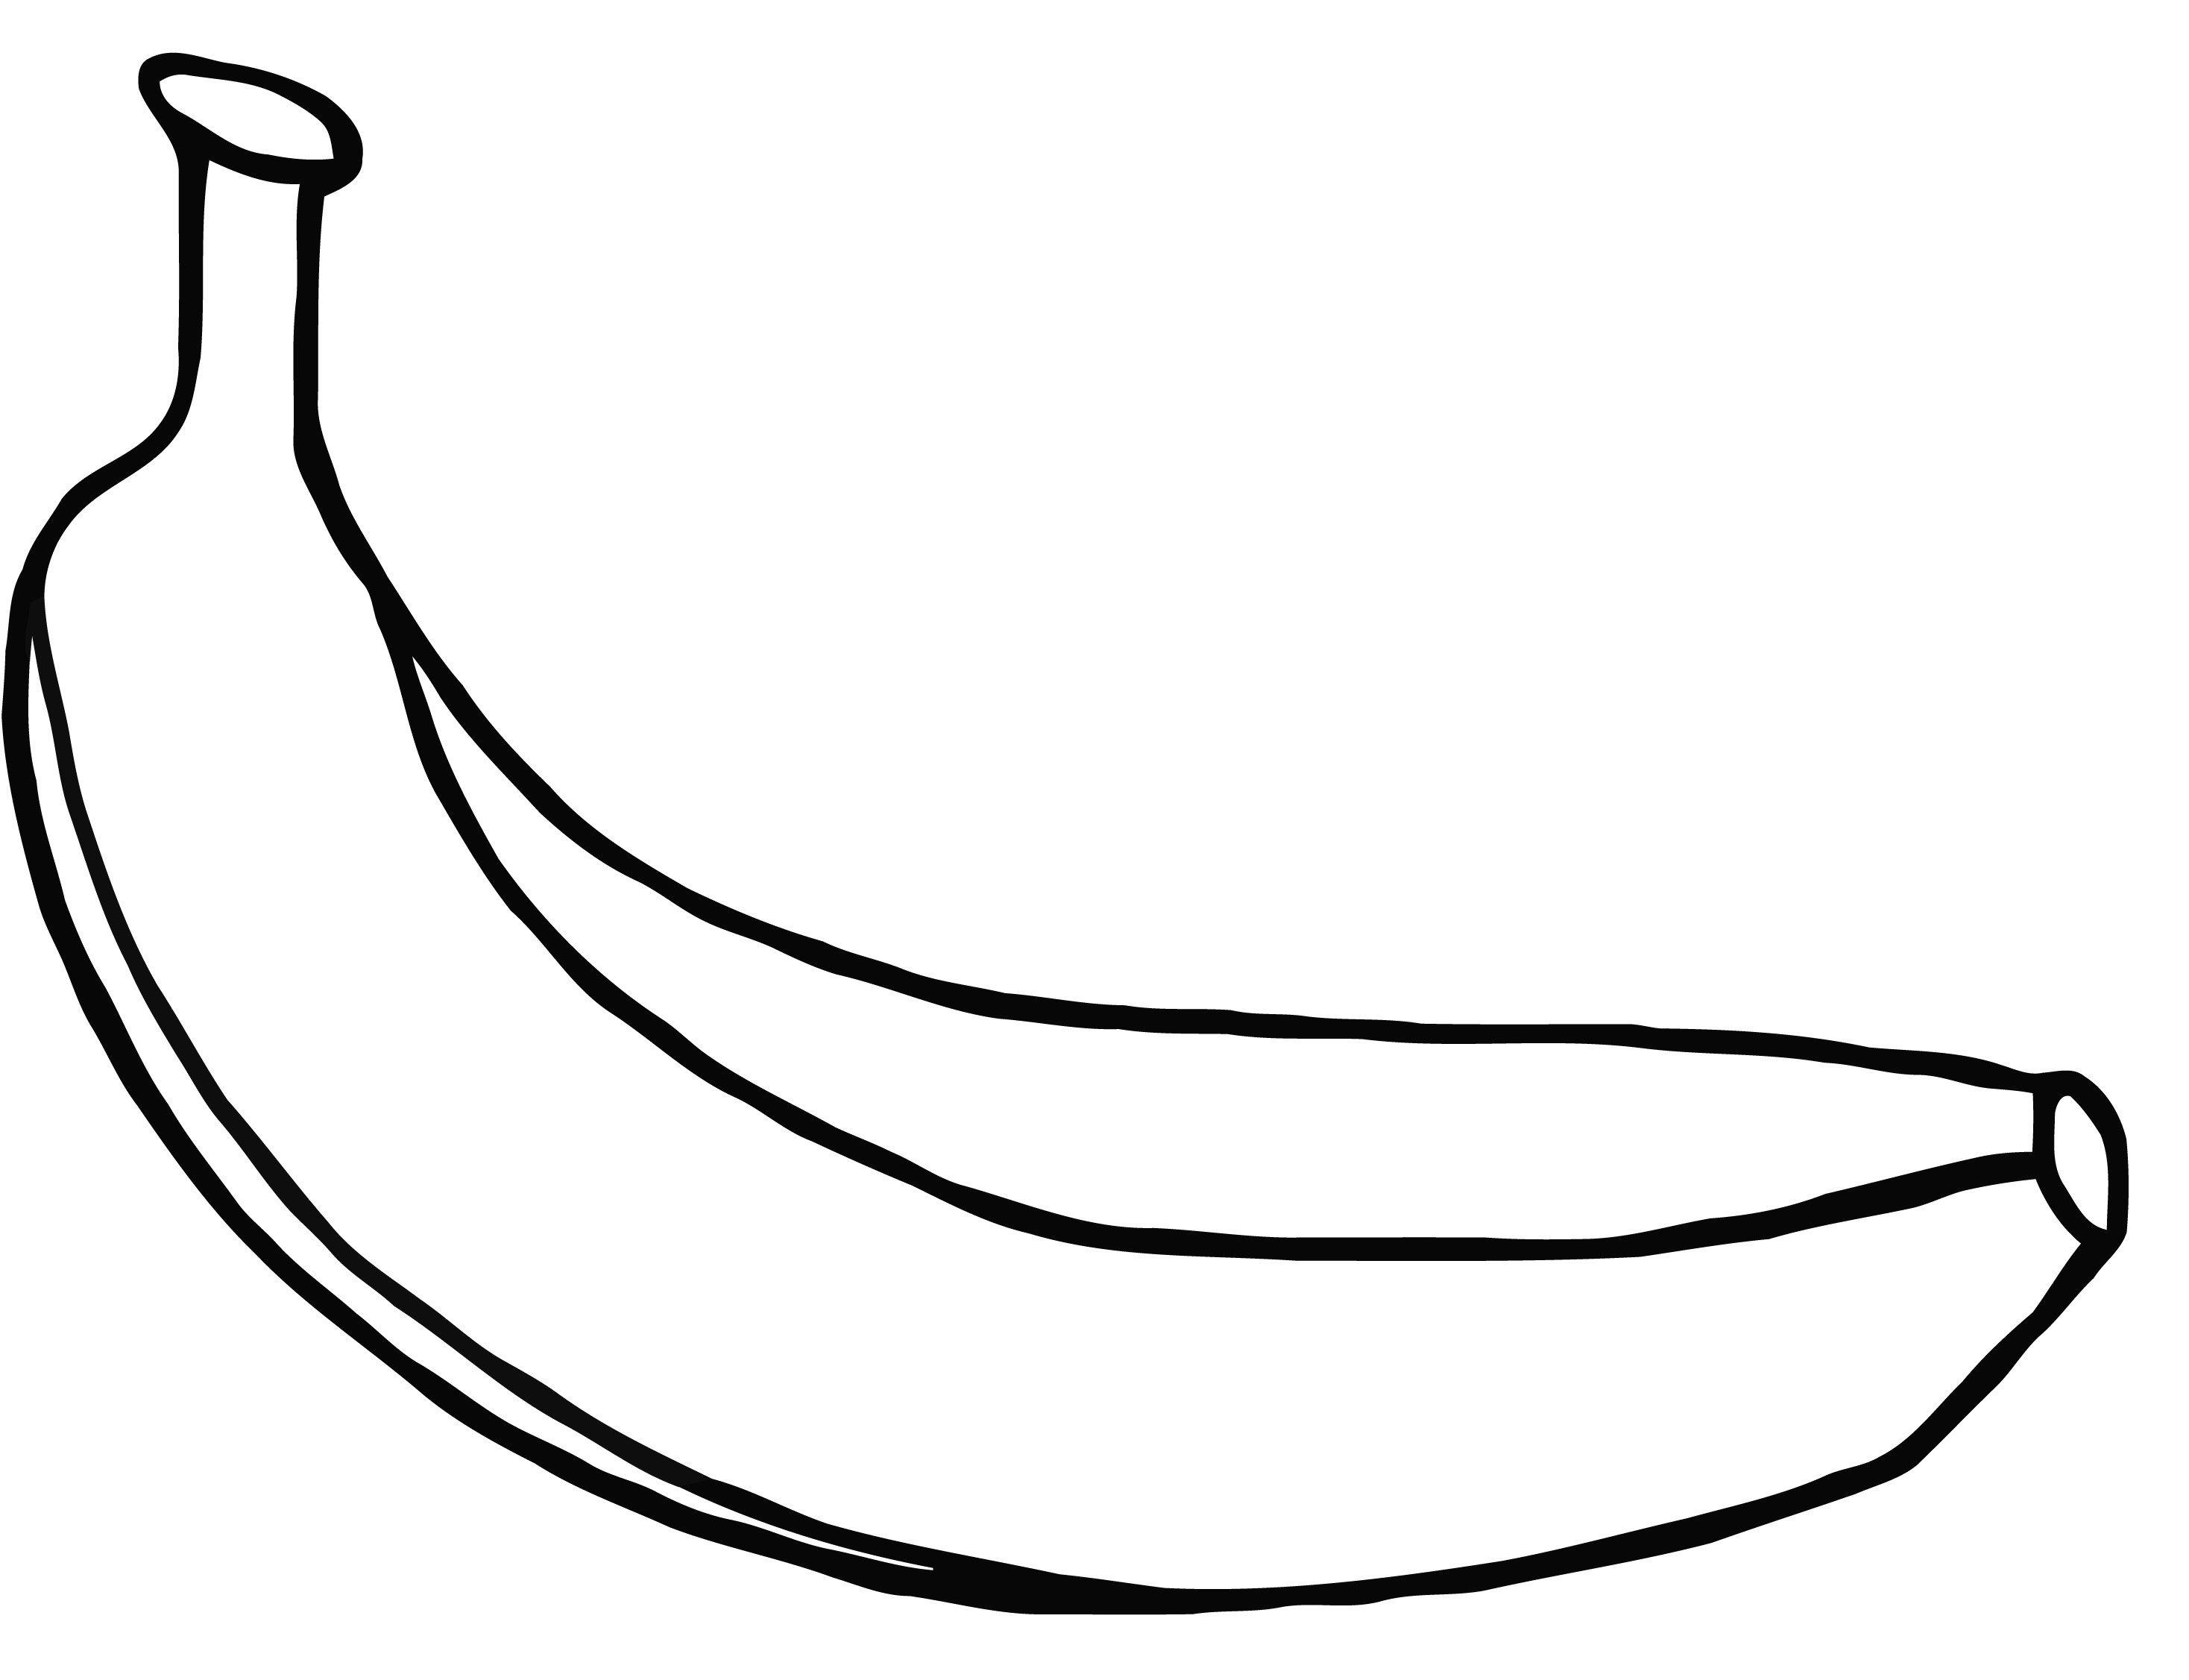 Fruits coloring pages for. Banana clipart line art